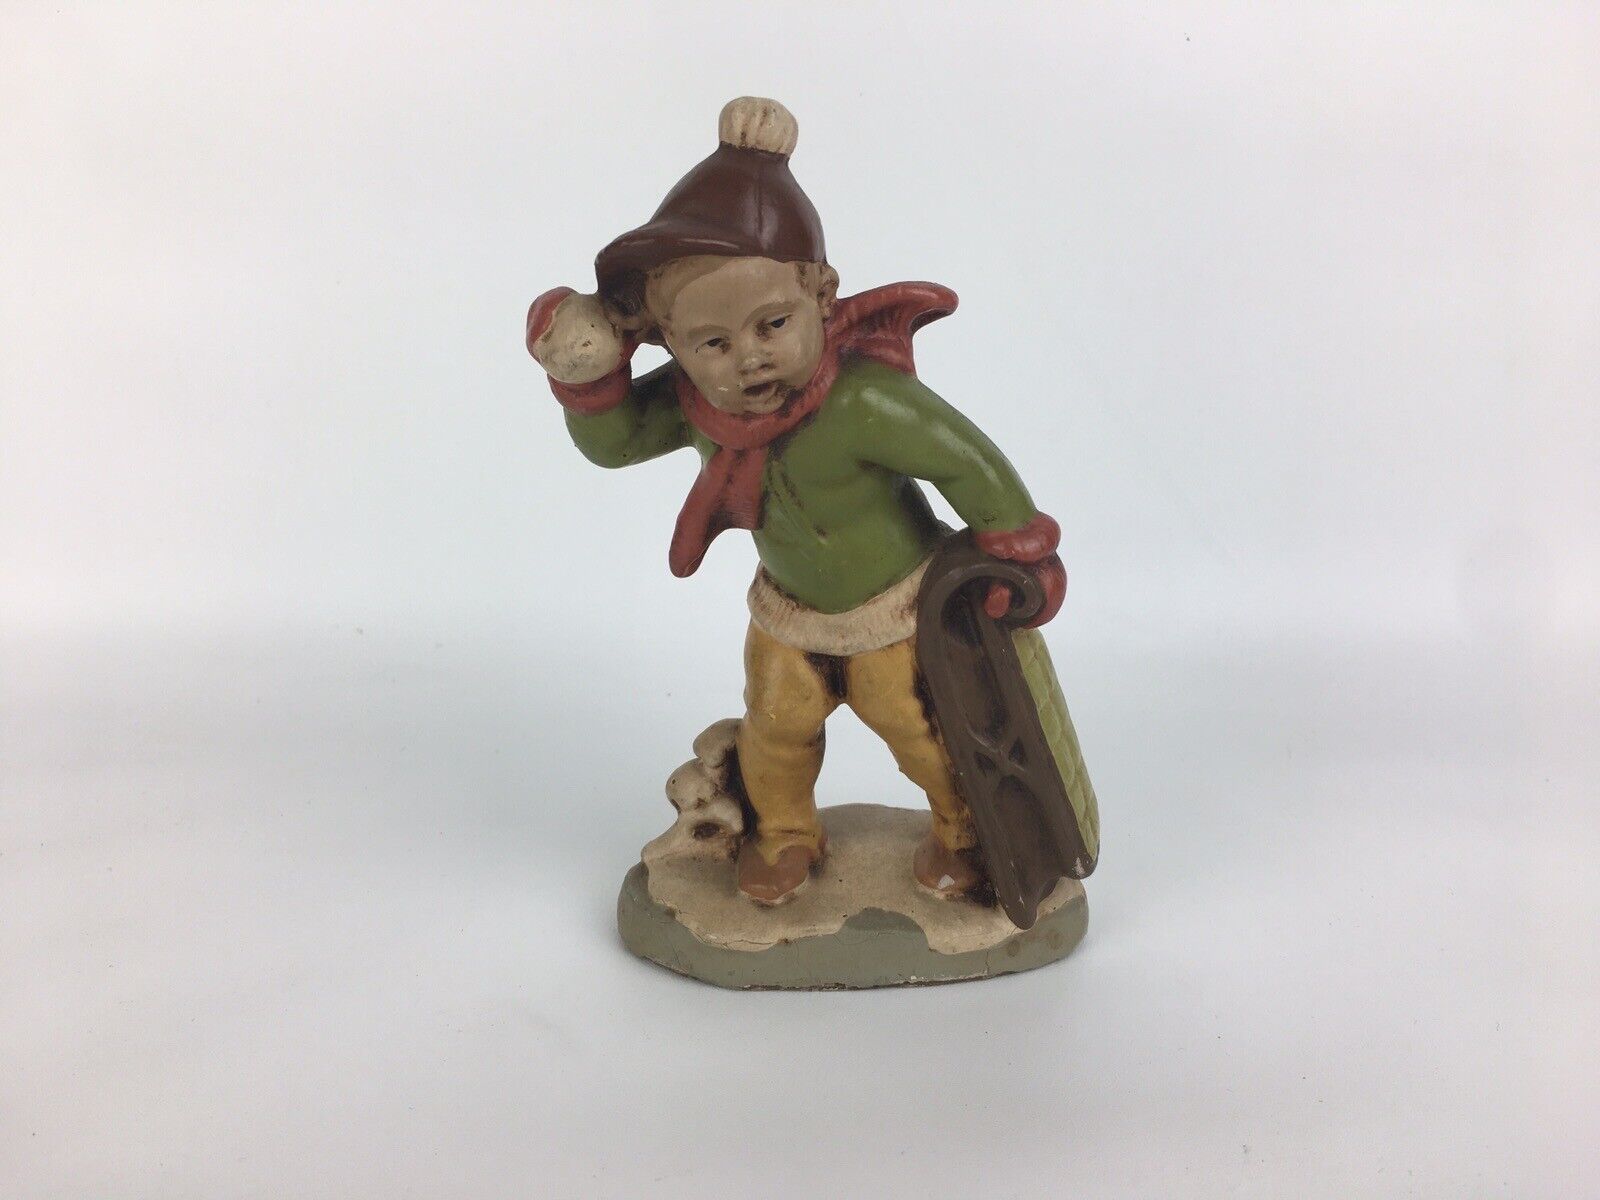 Boy With Sled Friedel Germany Paper Mache Figurine Vintage 4.5” Tall 